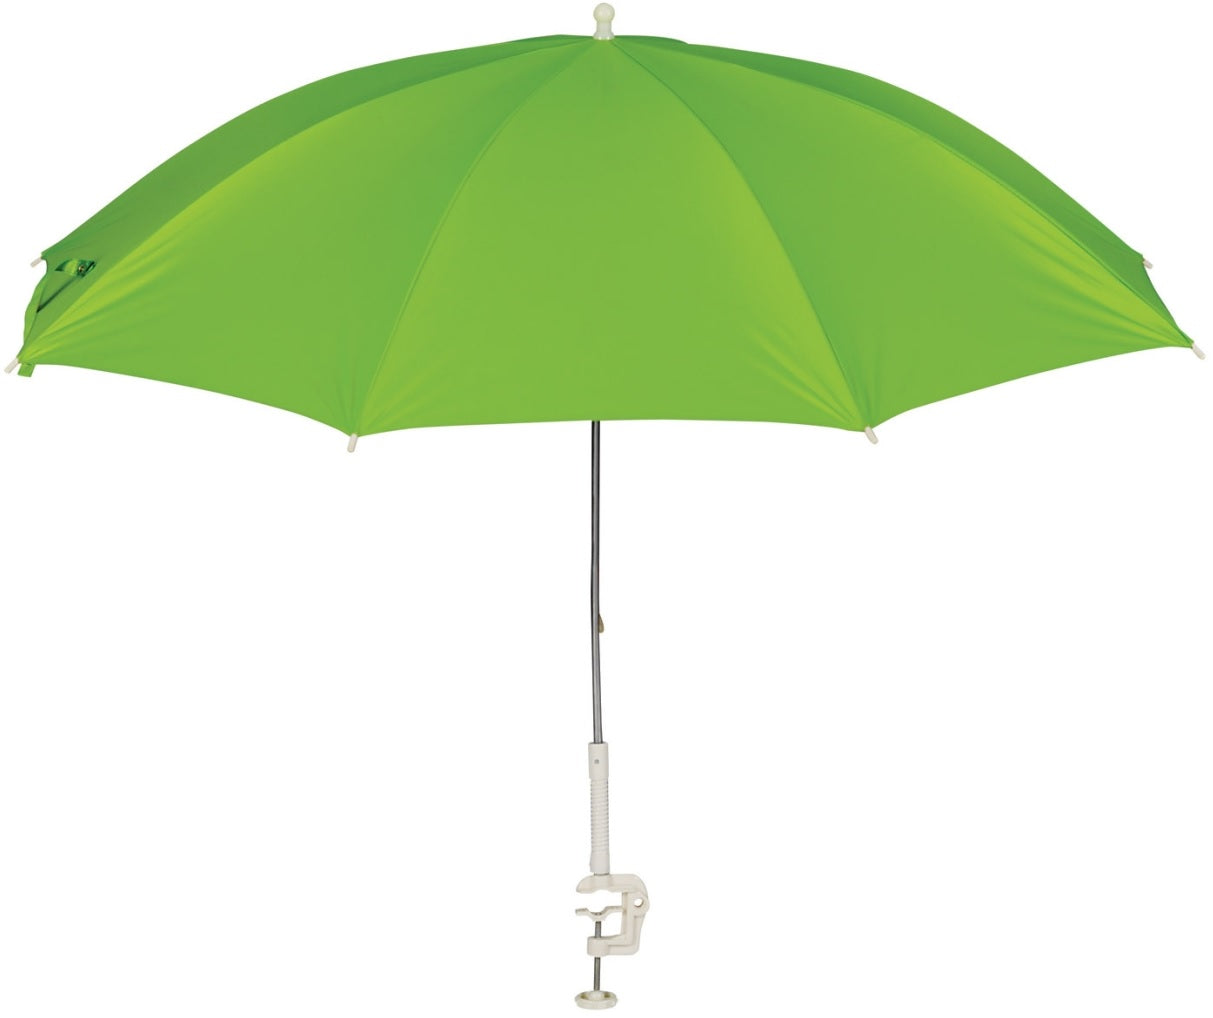 Living Accents Clamp-on Umbrella, Assorted Colors (blue/green)